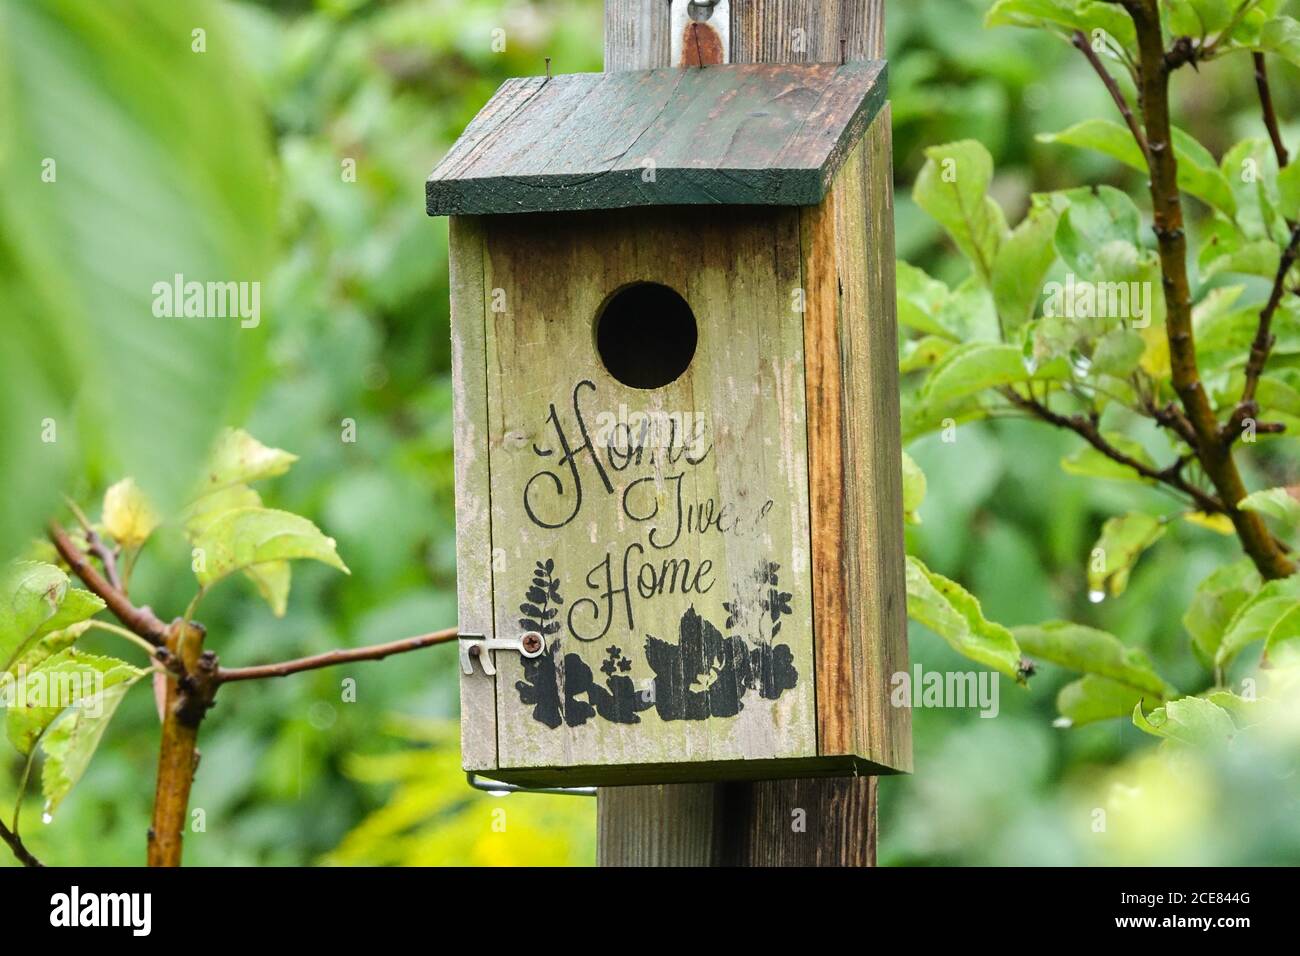 Home sweet home sign birdhouse Stock Photo